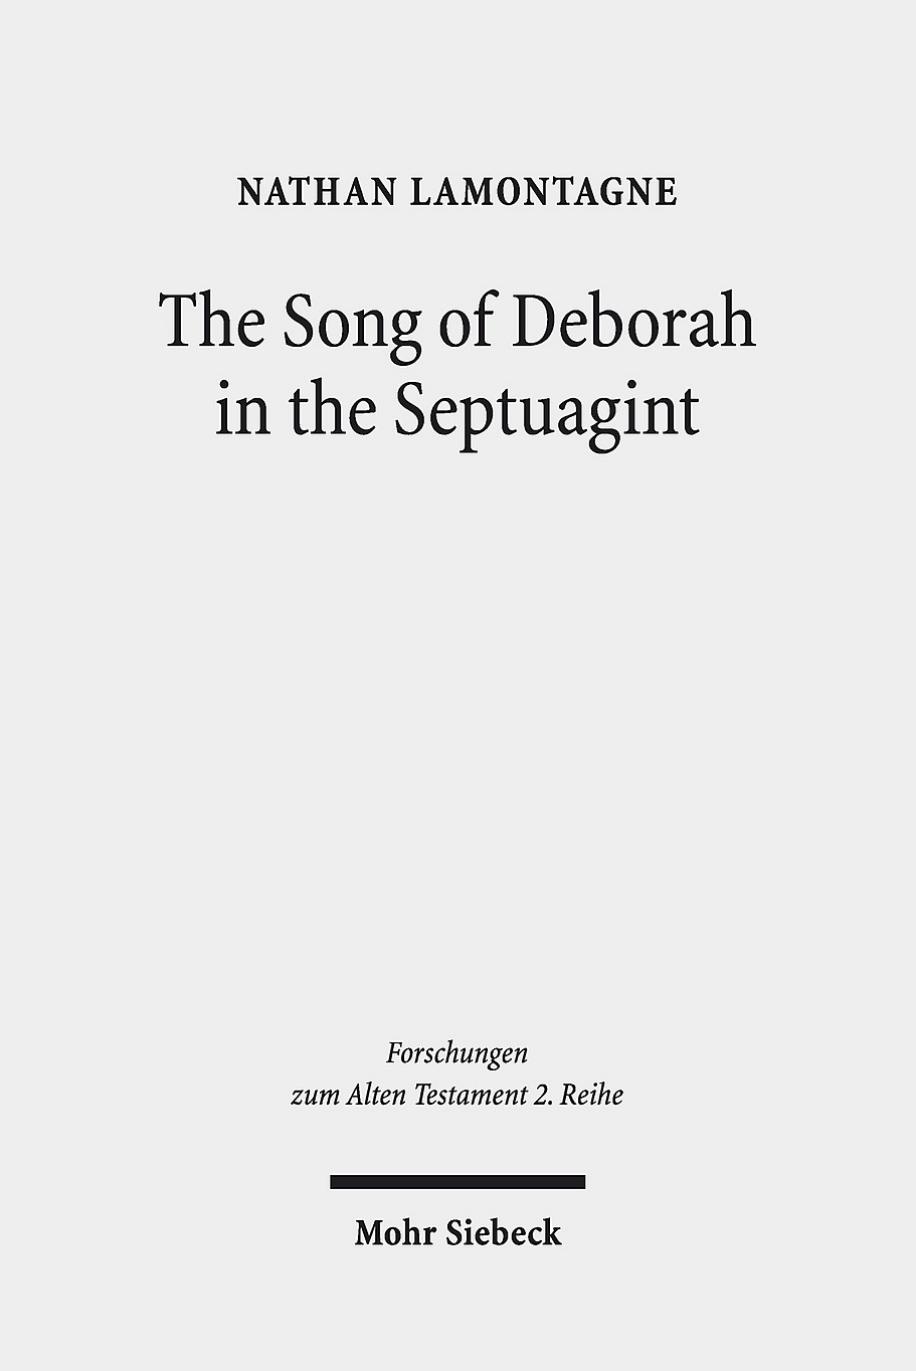 The Song of Deborah in the Septuagint by Nathan LaMontagne